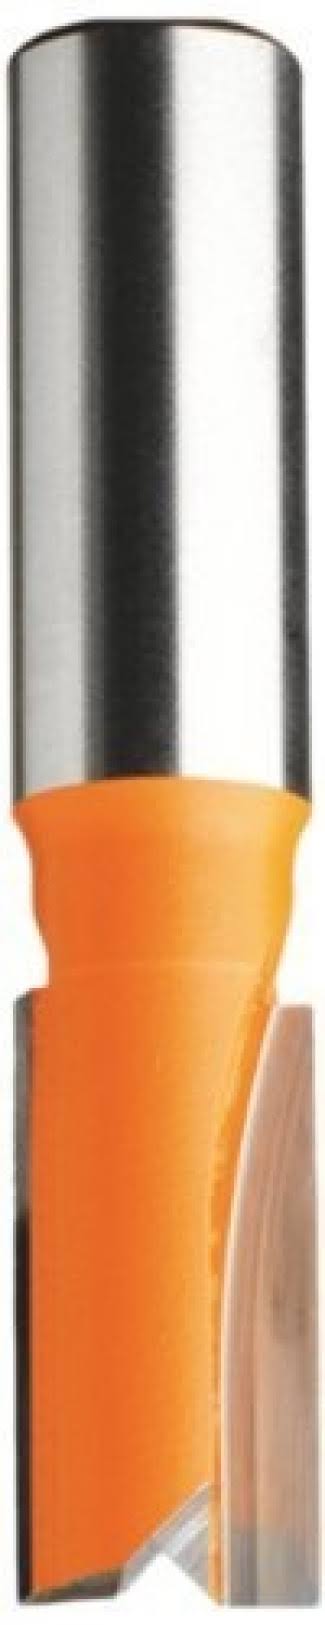 CMT Carbide-Tipped Straight Bit - 1/2in Shank, 23/32in D